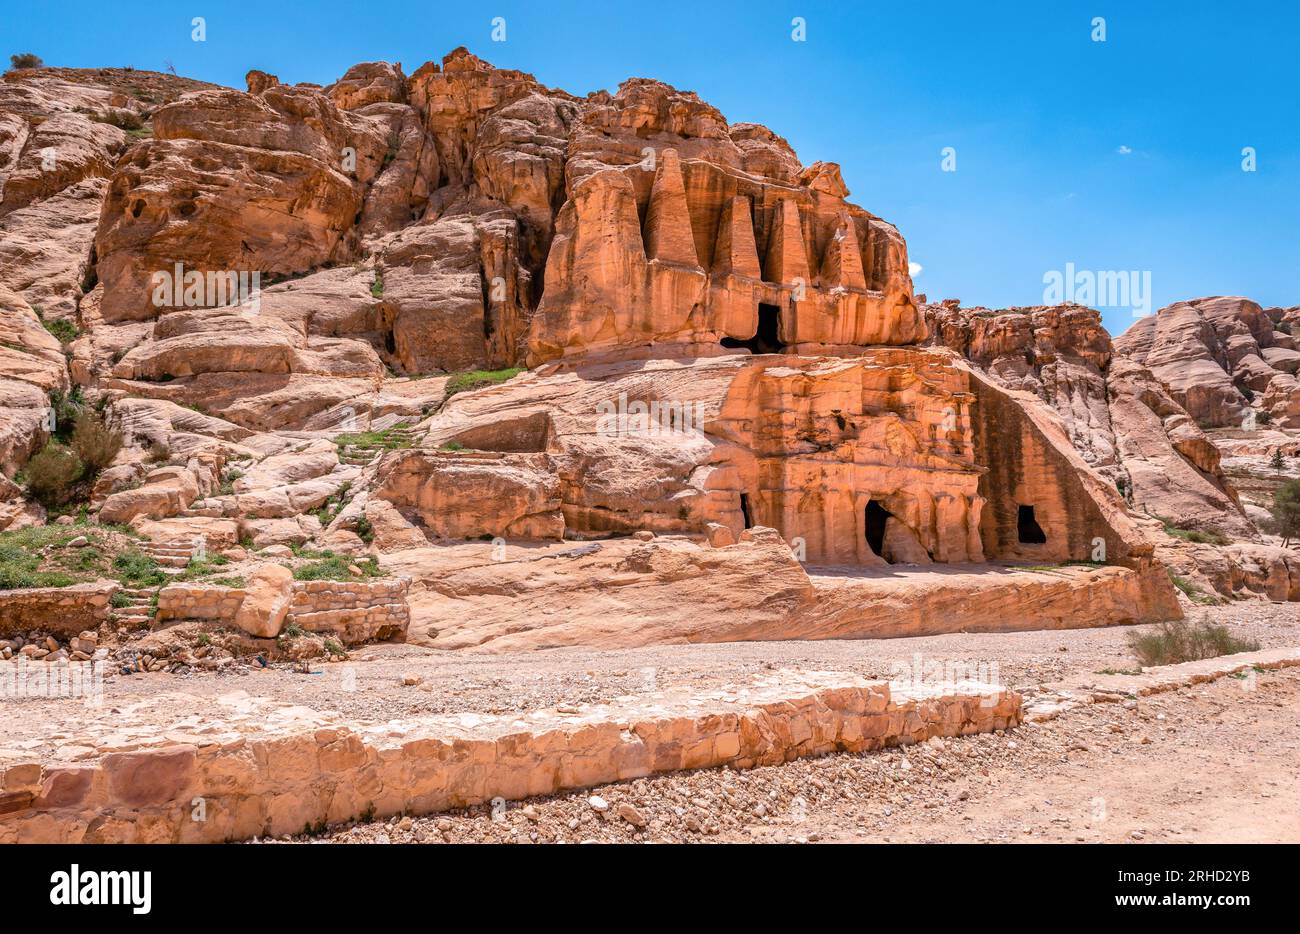 View of the main road to Petra, with row of monumental Nabataean tombs  carved in the cliff face. Stock Photo